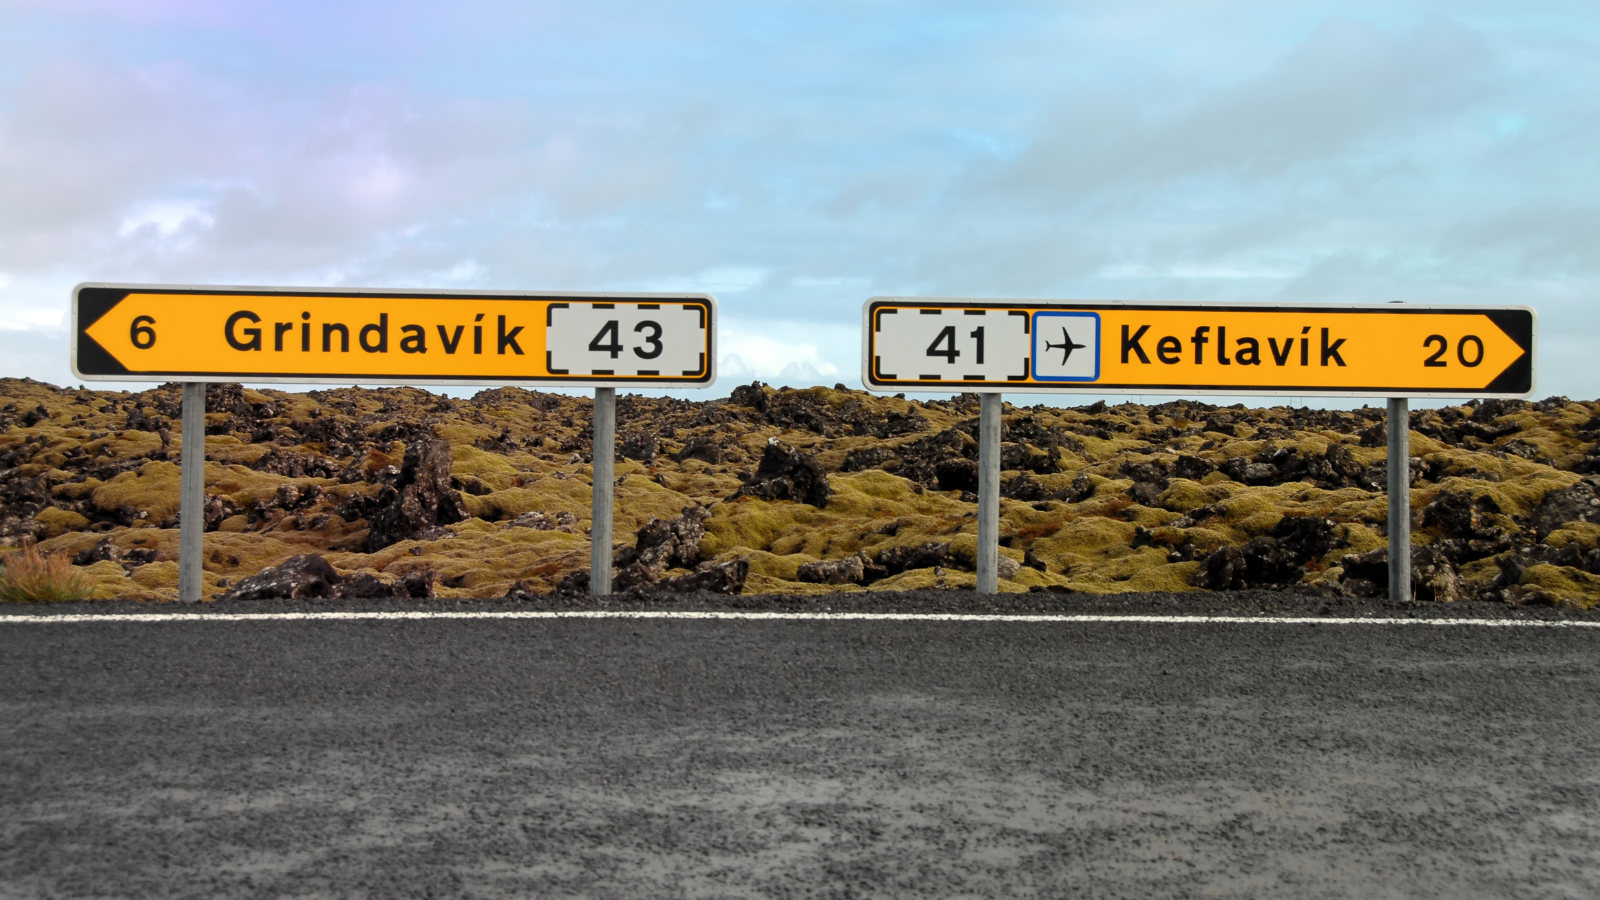 Road signs reading Grindavík on the left and Keflavík on the right.